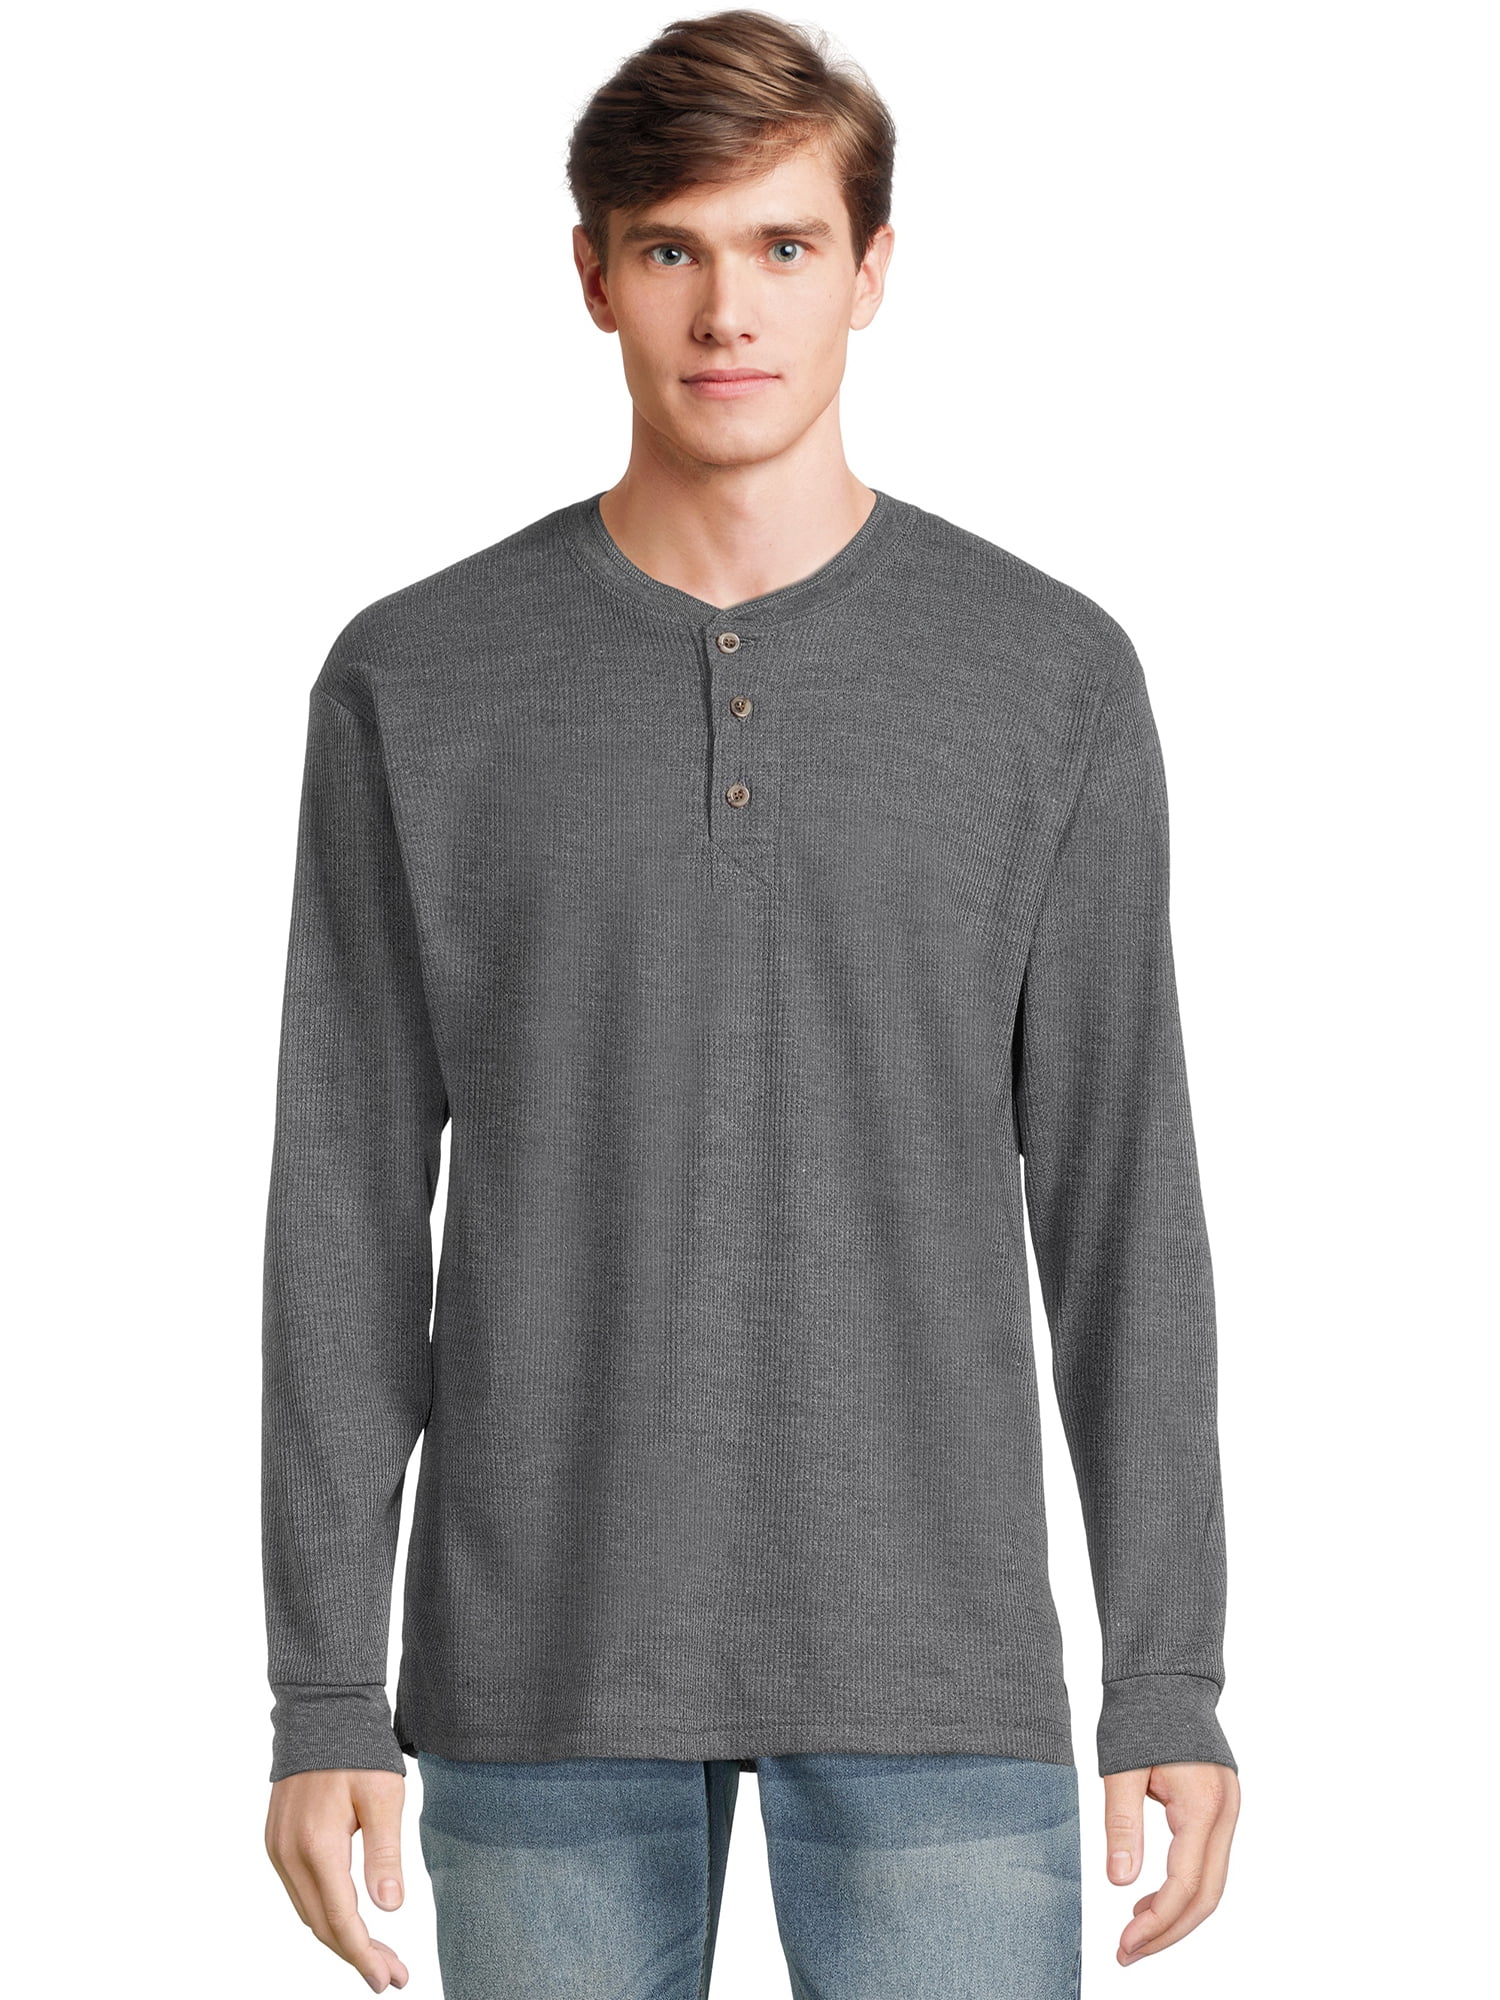 Smith & Eagle Men's Heavyweight Thermal Henley Shirt with Long